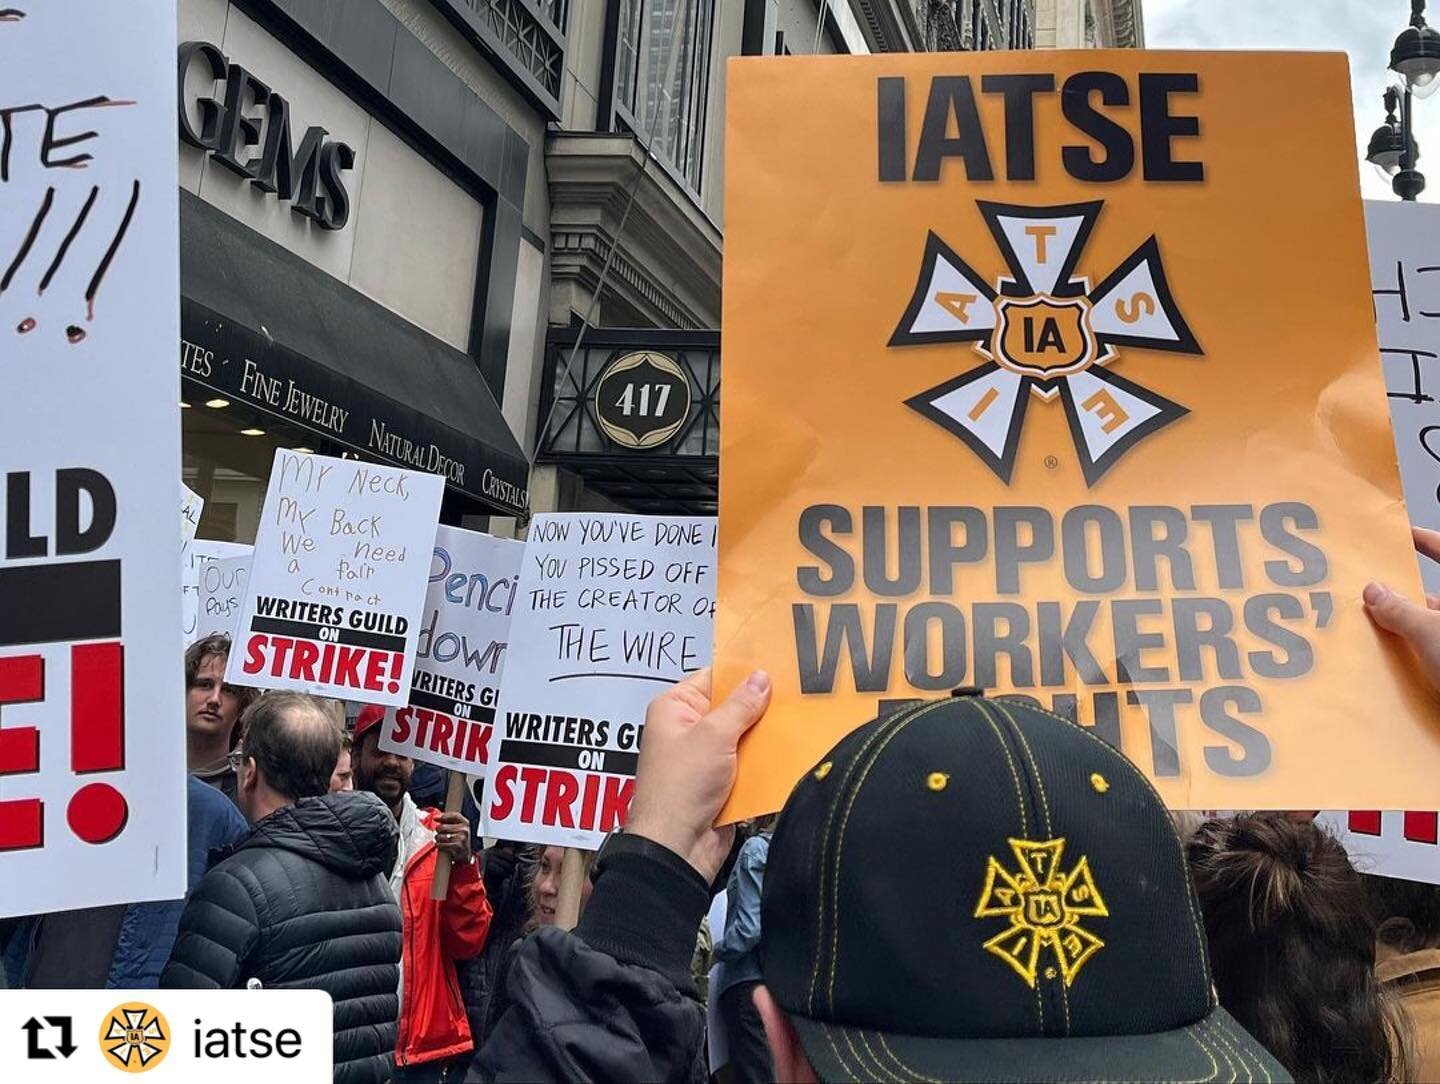 #Solidarity 👊🏻

#Repost @iatse with @use.repost
・・・
Workers united will never be defeated! Solidarity with @wgaeast and @writersguildwest! #Iatse